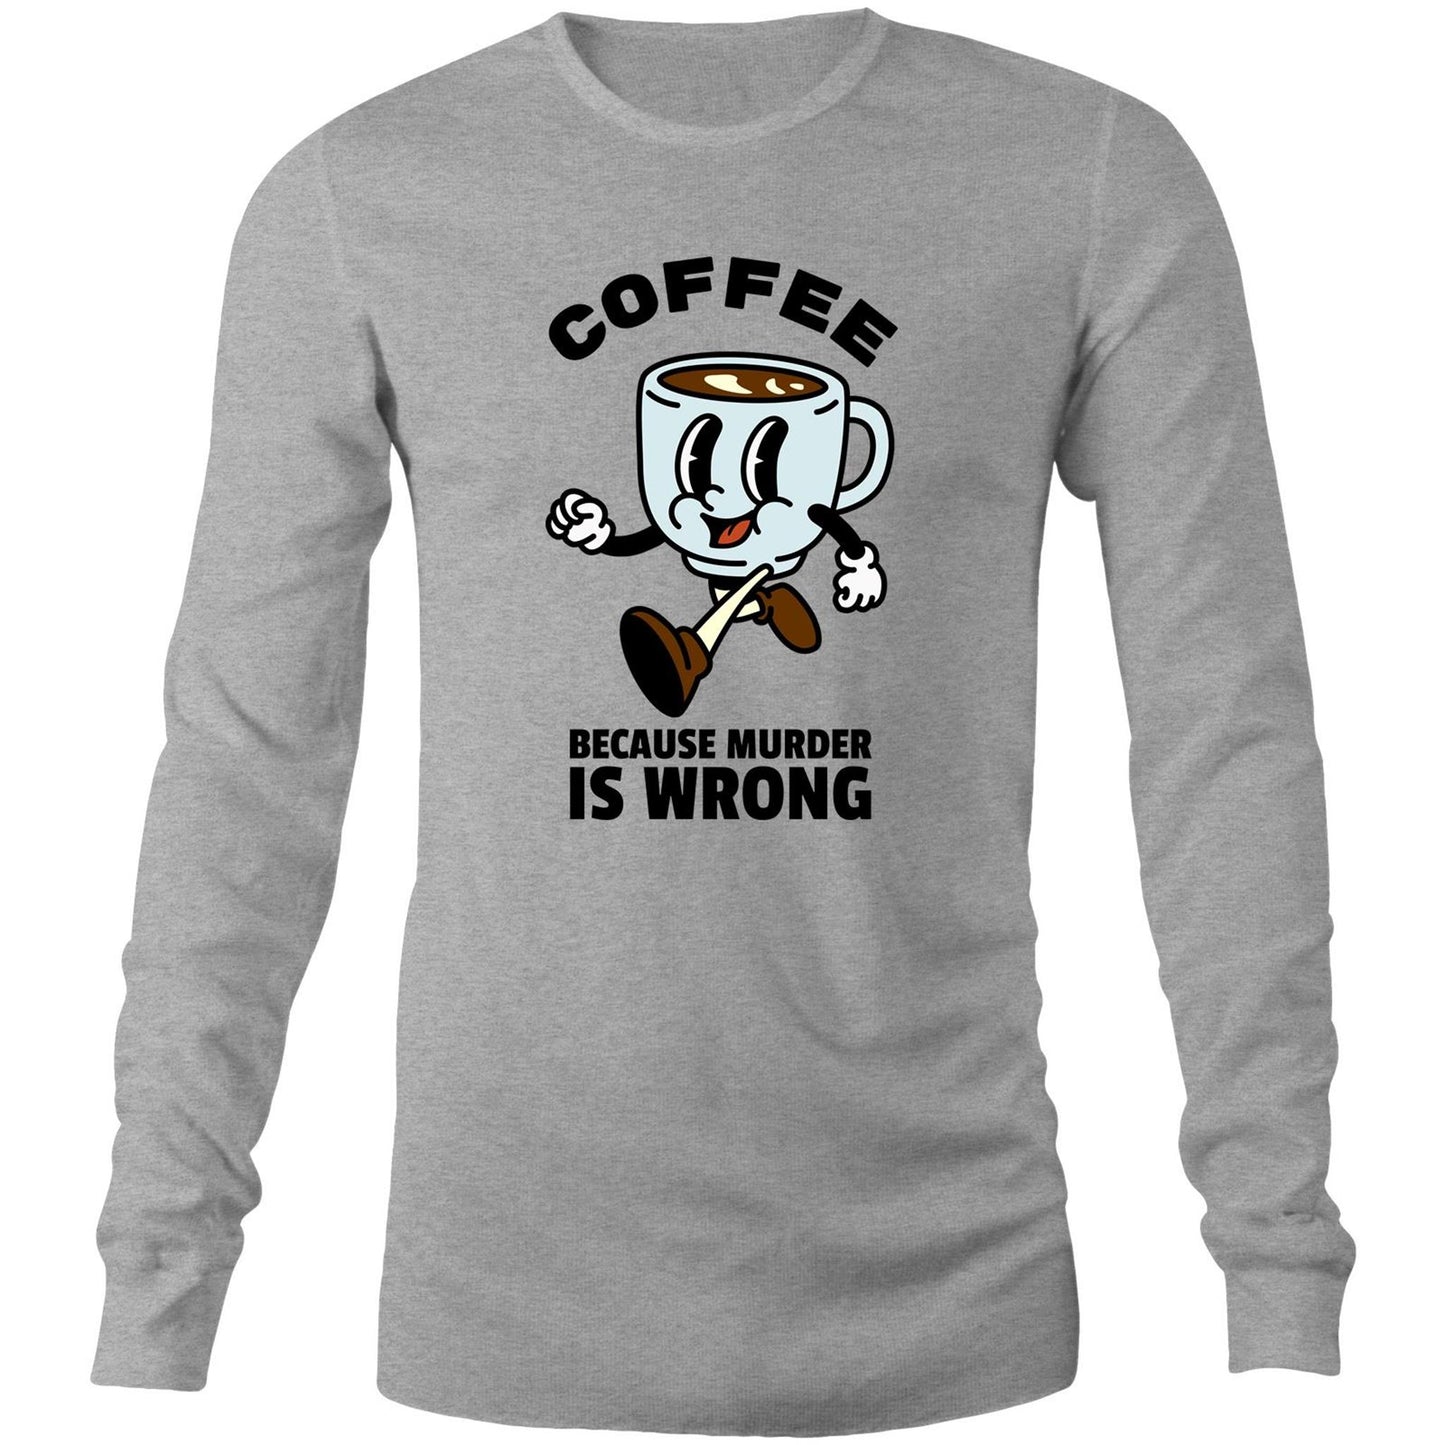 Coffee, Because Murder Is Wrong - Long Sleeve T-Shirt Grey Marle Unisex Long Sleeve T-shirt Coffee